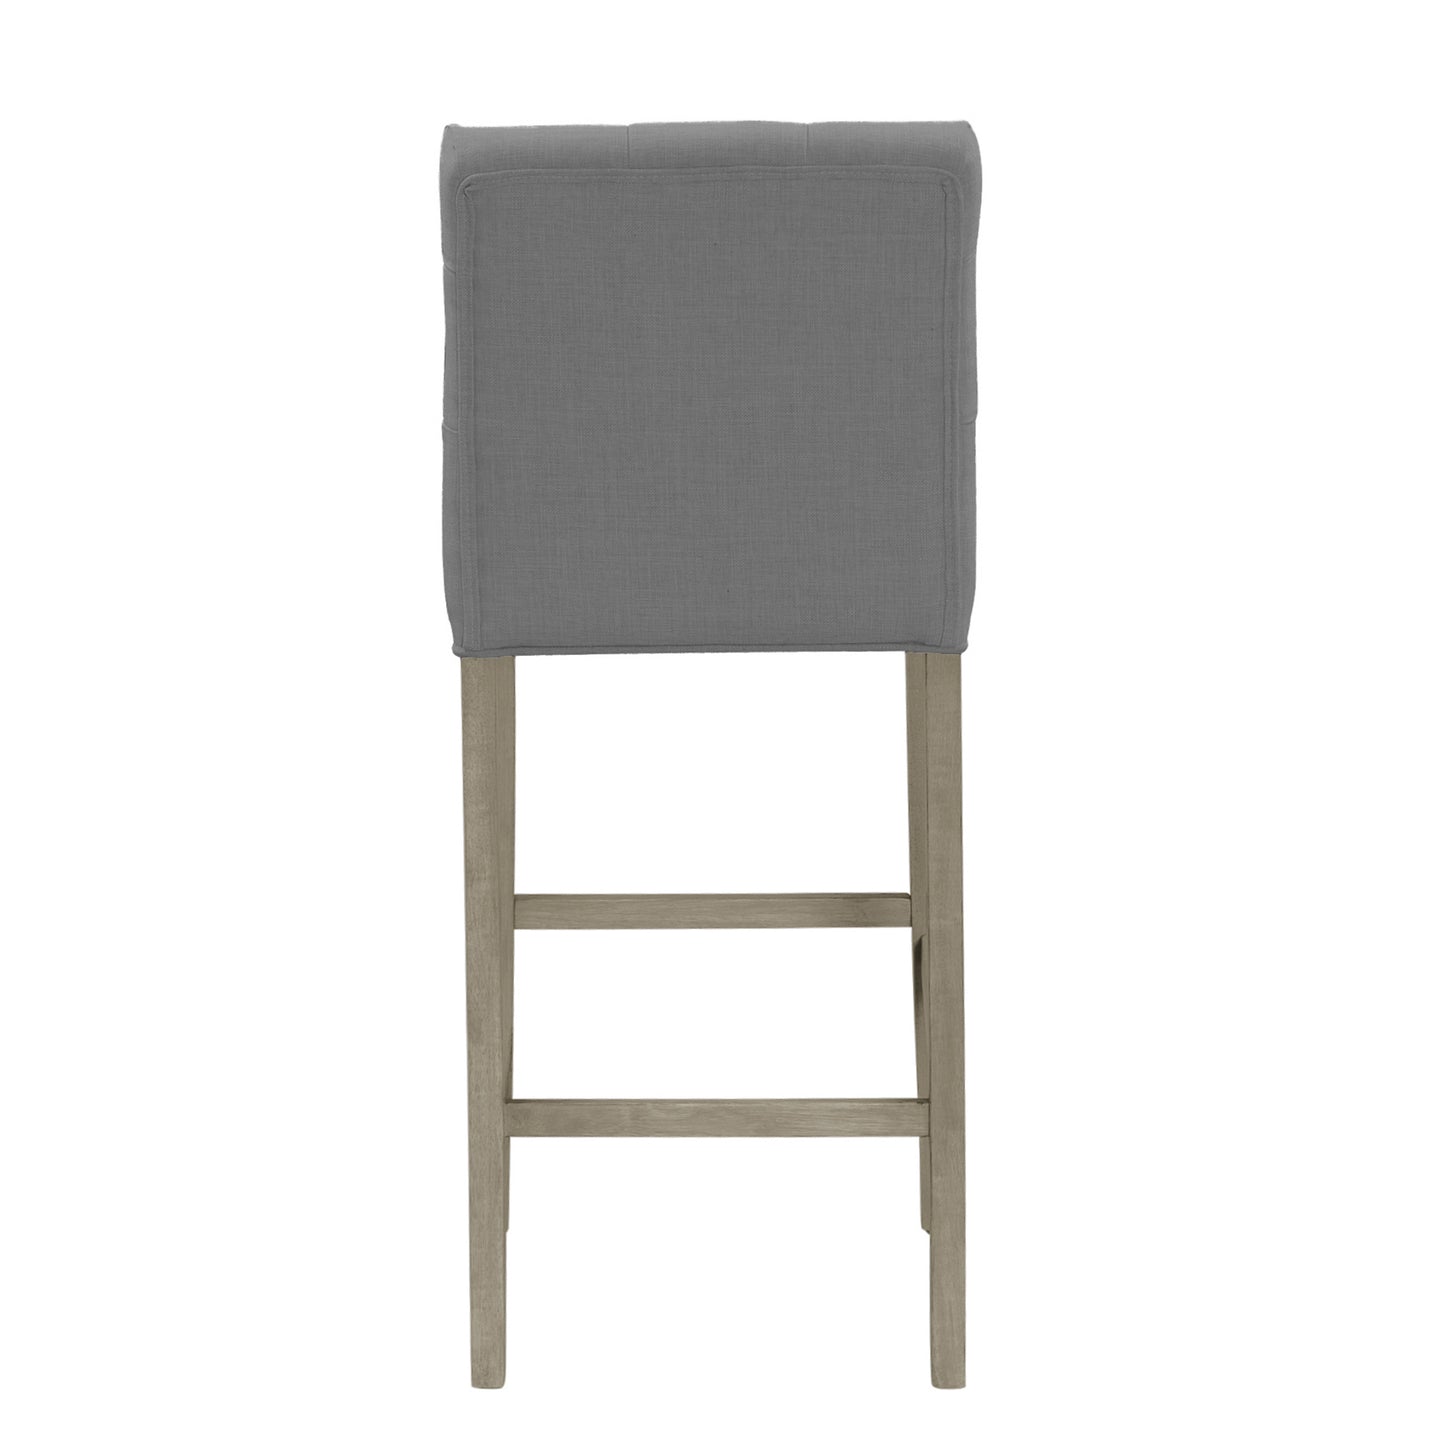 Set of 2 Alee Grey Fabric Bar Stool with Tufted Buttons and Wood Legs